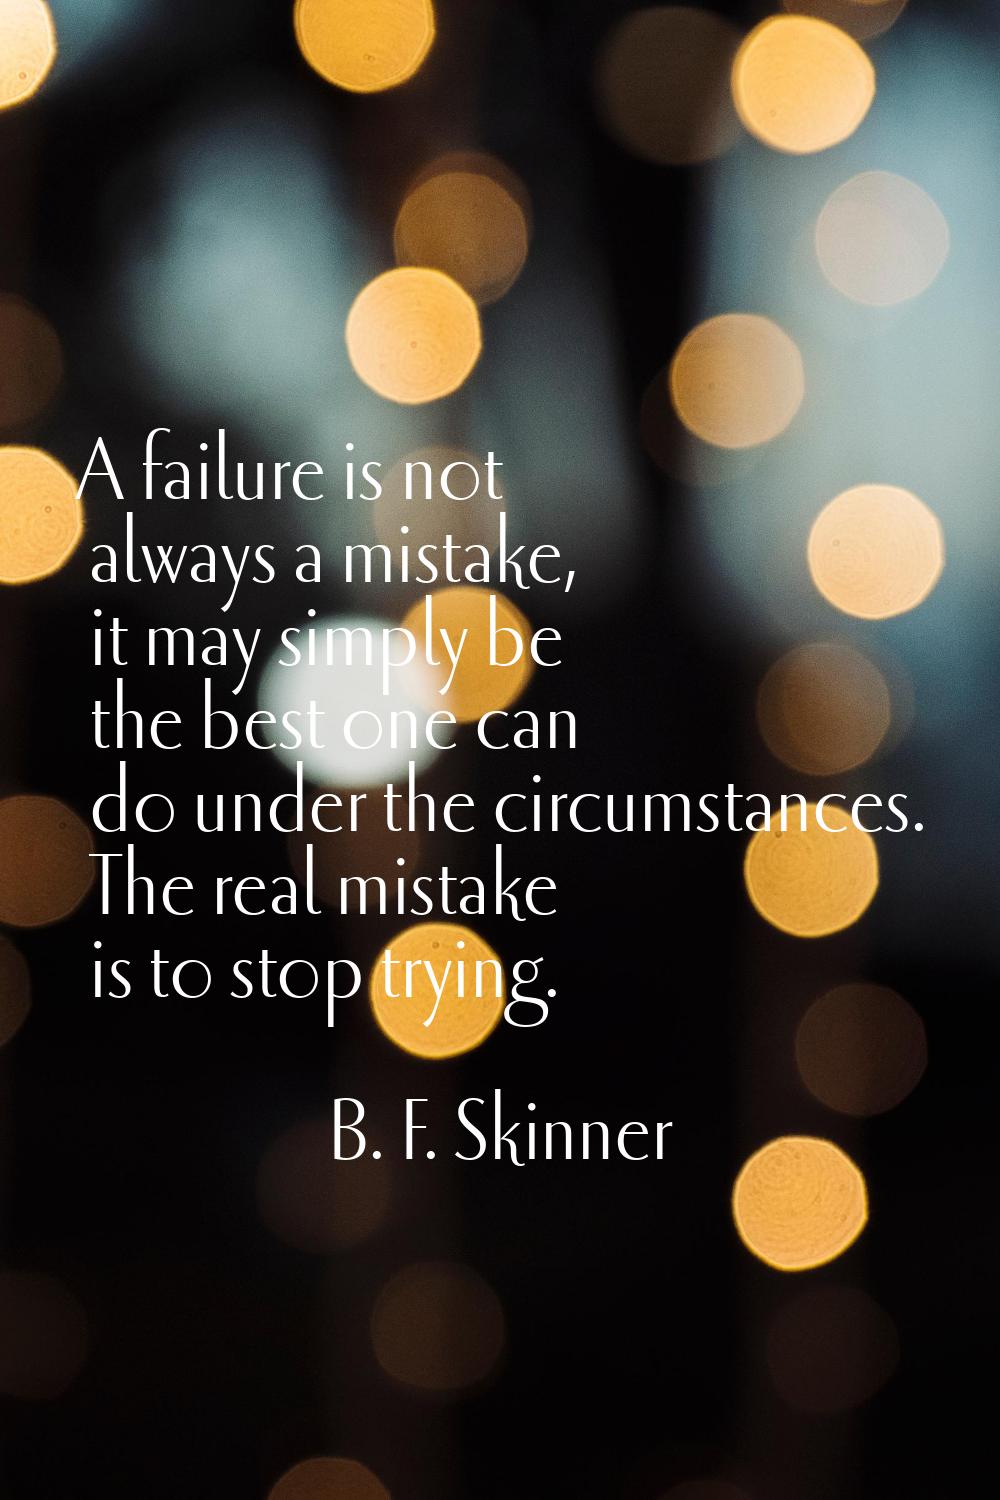 A failure is not always a mistake, it may simply be the best one can do under the circumstances. Th